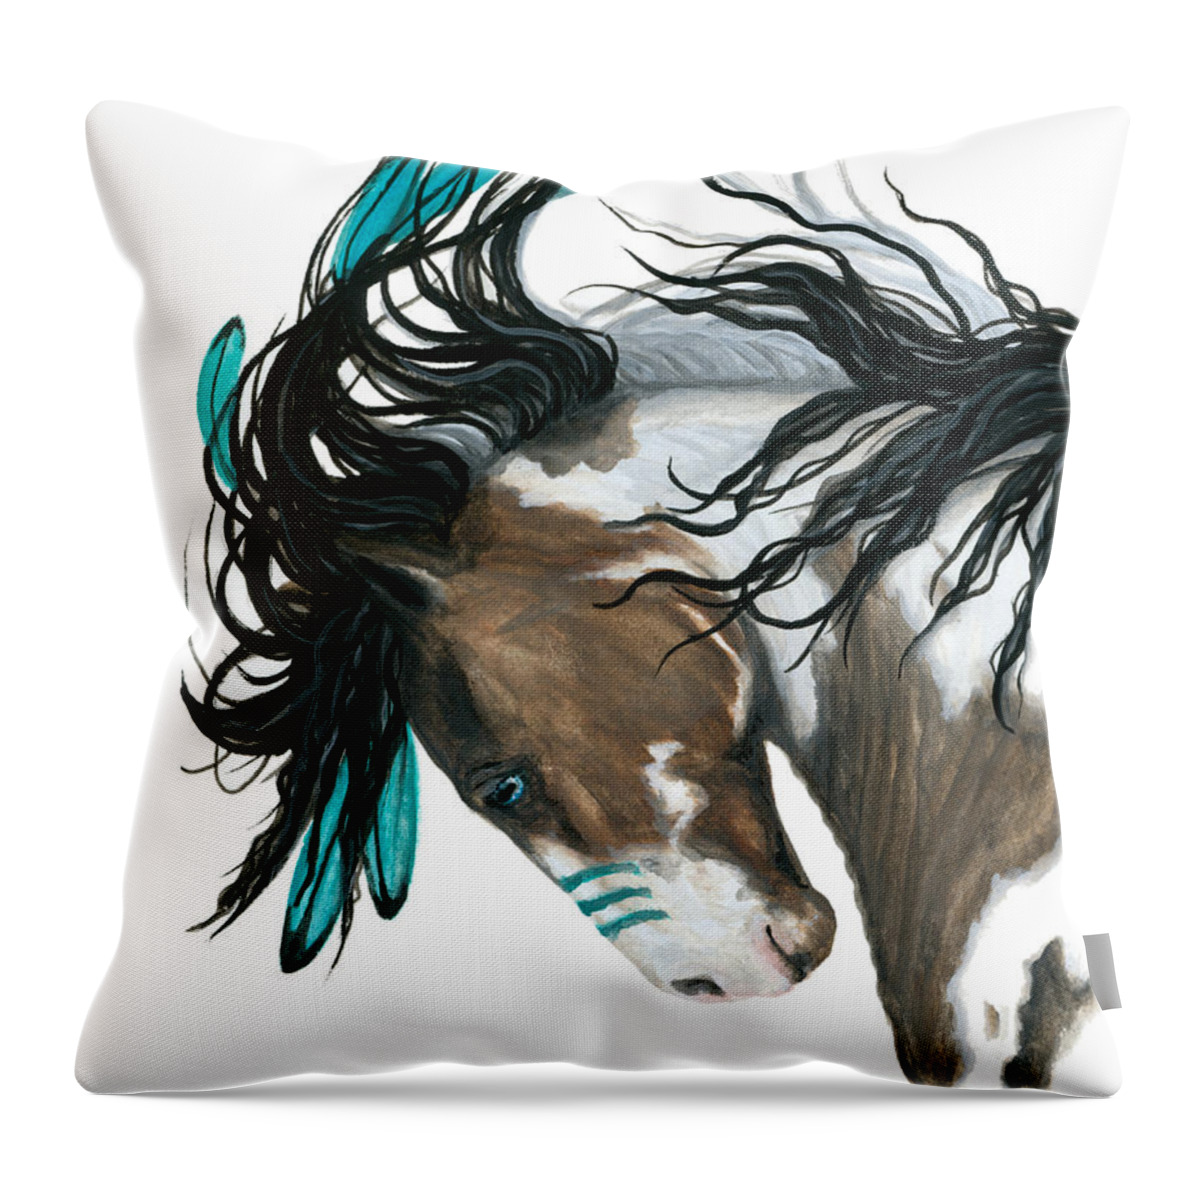 Turquoise Throw Pillow featuring the painting Majestic Turquoise Horse by AmyLyn Bihrle